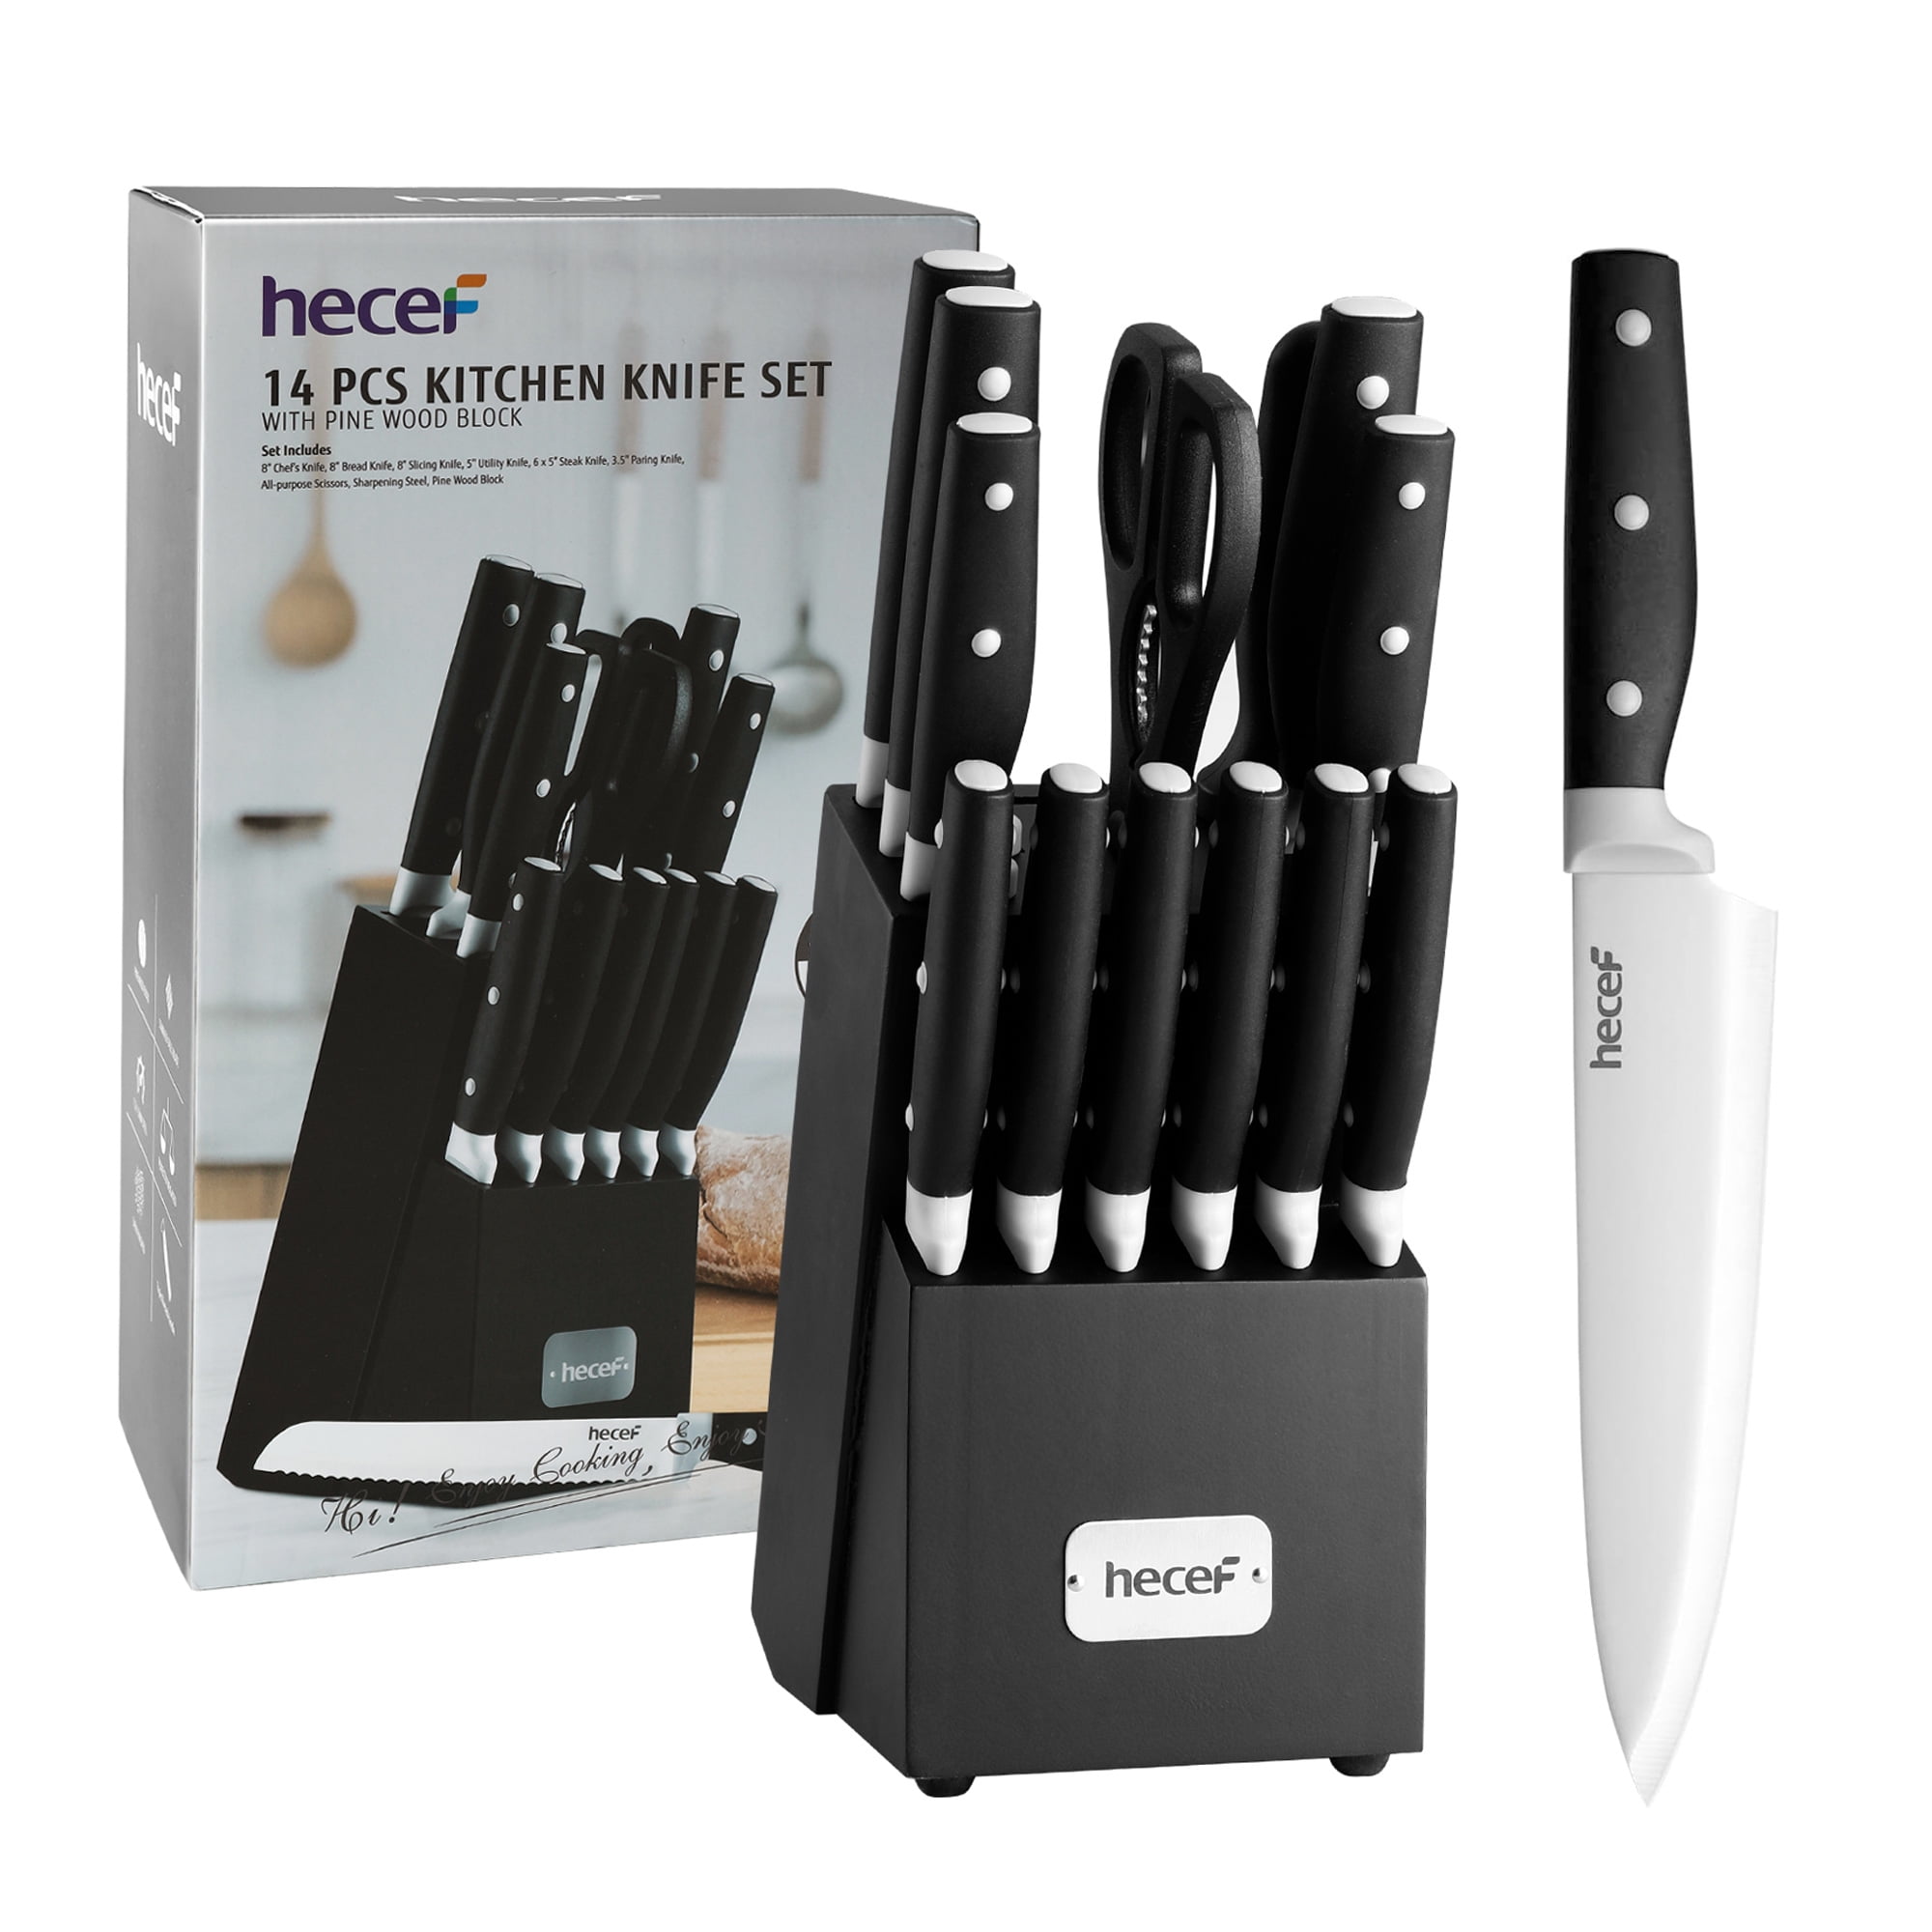 Commercial Chef 6 Piece High Carbon Stainless Steel Knife Block Set